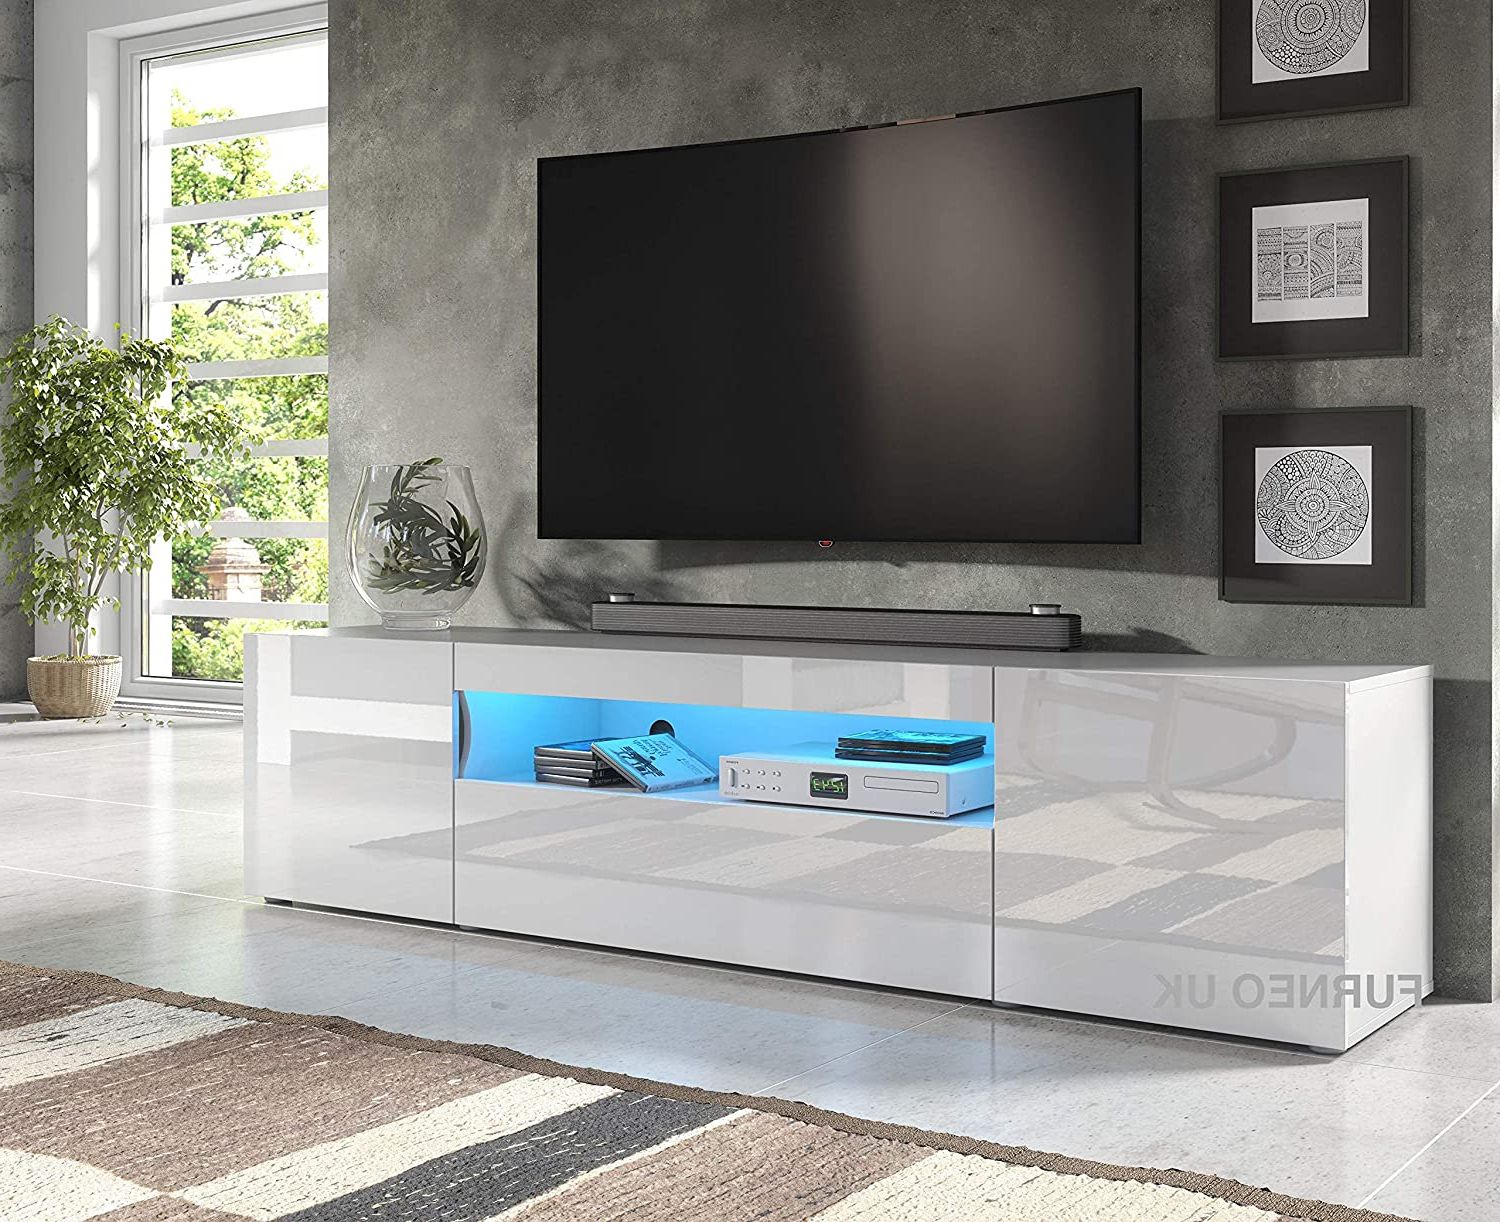 High Gloss Tv Stands Throughout Best And Newest Furneo 200cm Long Tv Stand Unit Cabinet Matt & High Gloss White Clifton08  Blue Led Lights: Amazon.co (View 3 of 10)